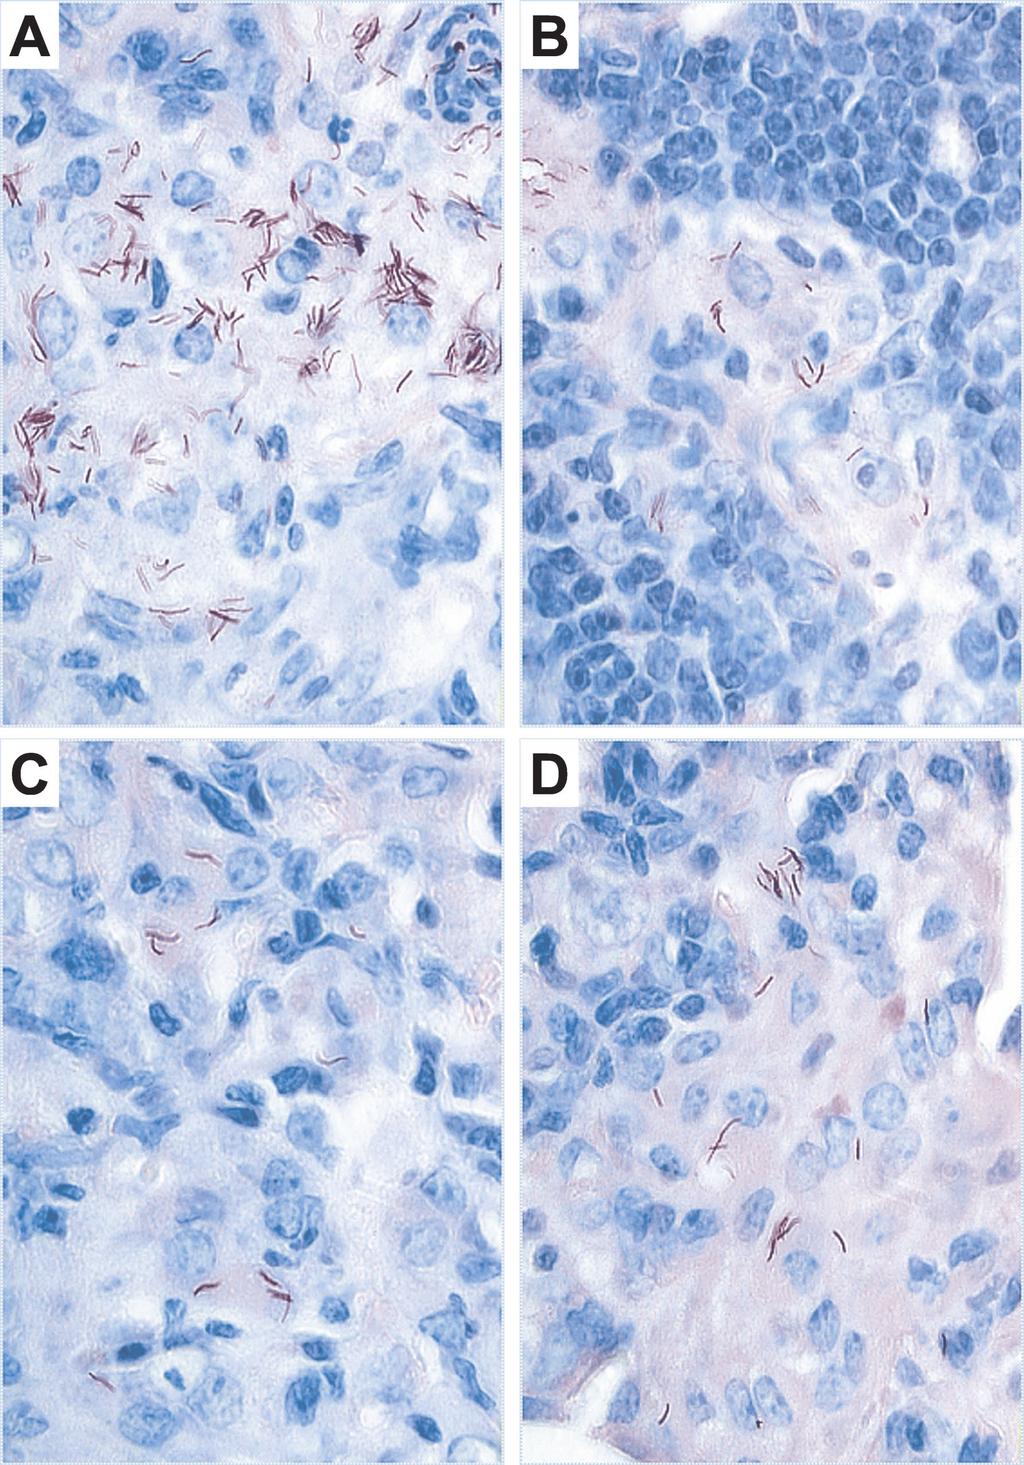 VOL. 70, 2002 DNA VACCINATION AGAINST TUBERCULOSIS 297 FIG. 3. Acid-fast bacillus staining of lung tissues from vaccinated mice infected with M. tuberculosis.